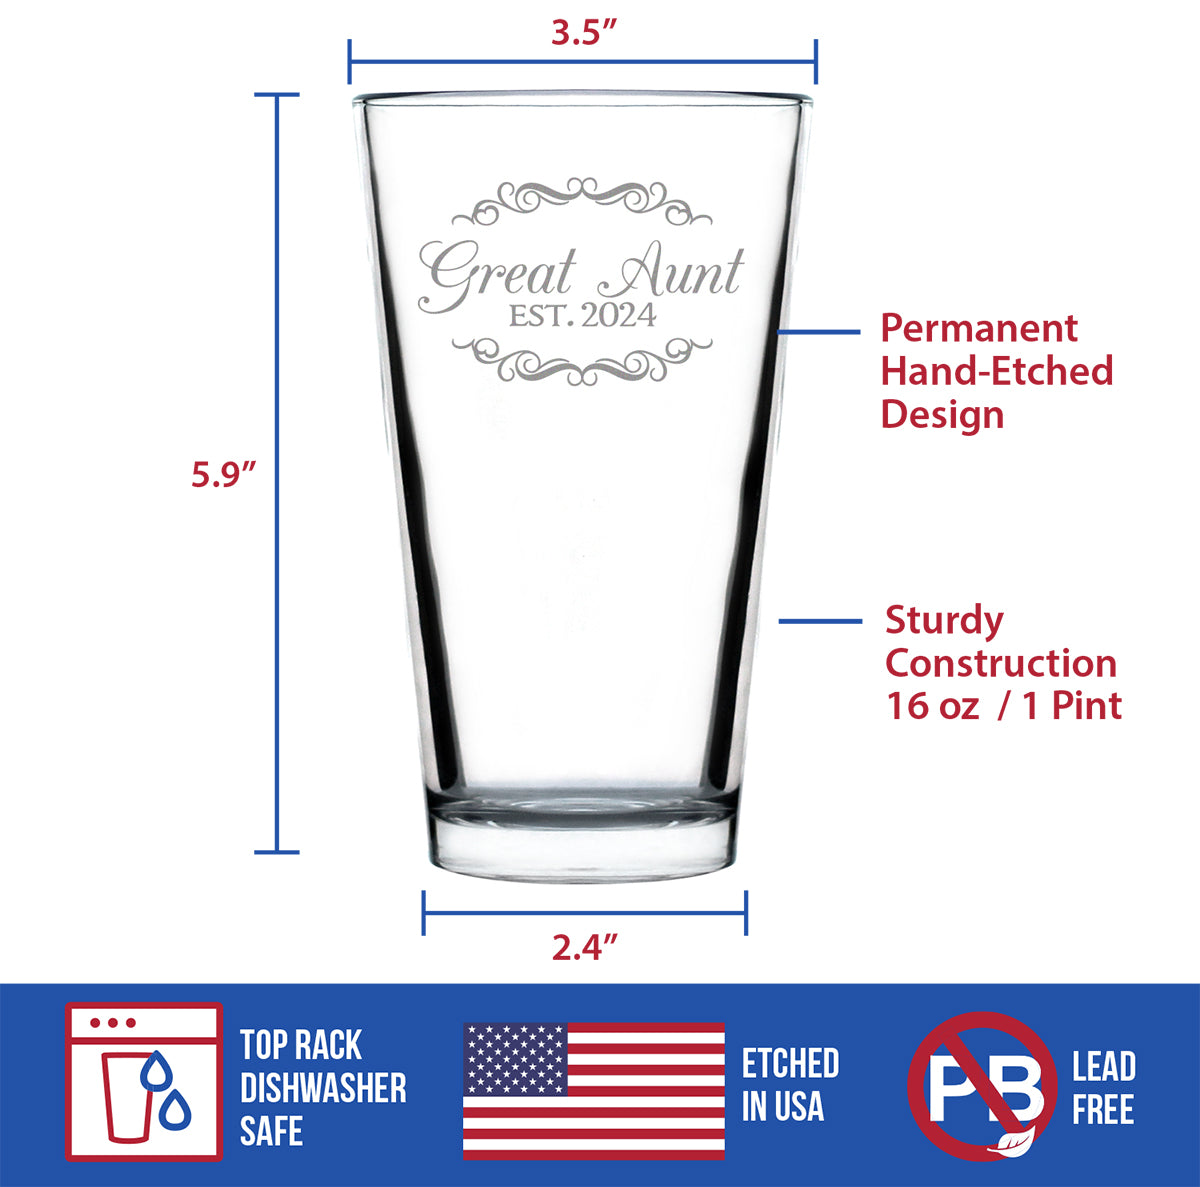 Great Aunt Est 2024 - New Great Aunts Pint Glass Gift for First Time Great Aunts - Decorative 16 Oz Glasses